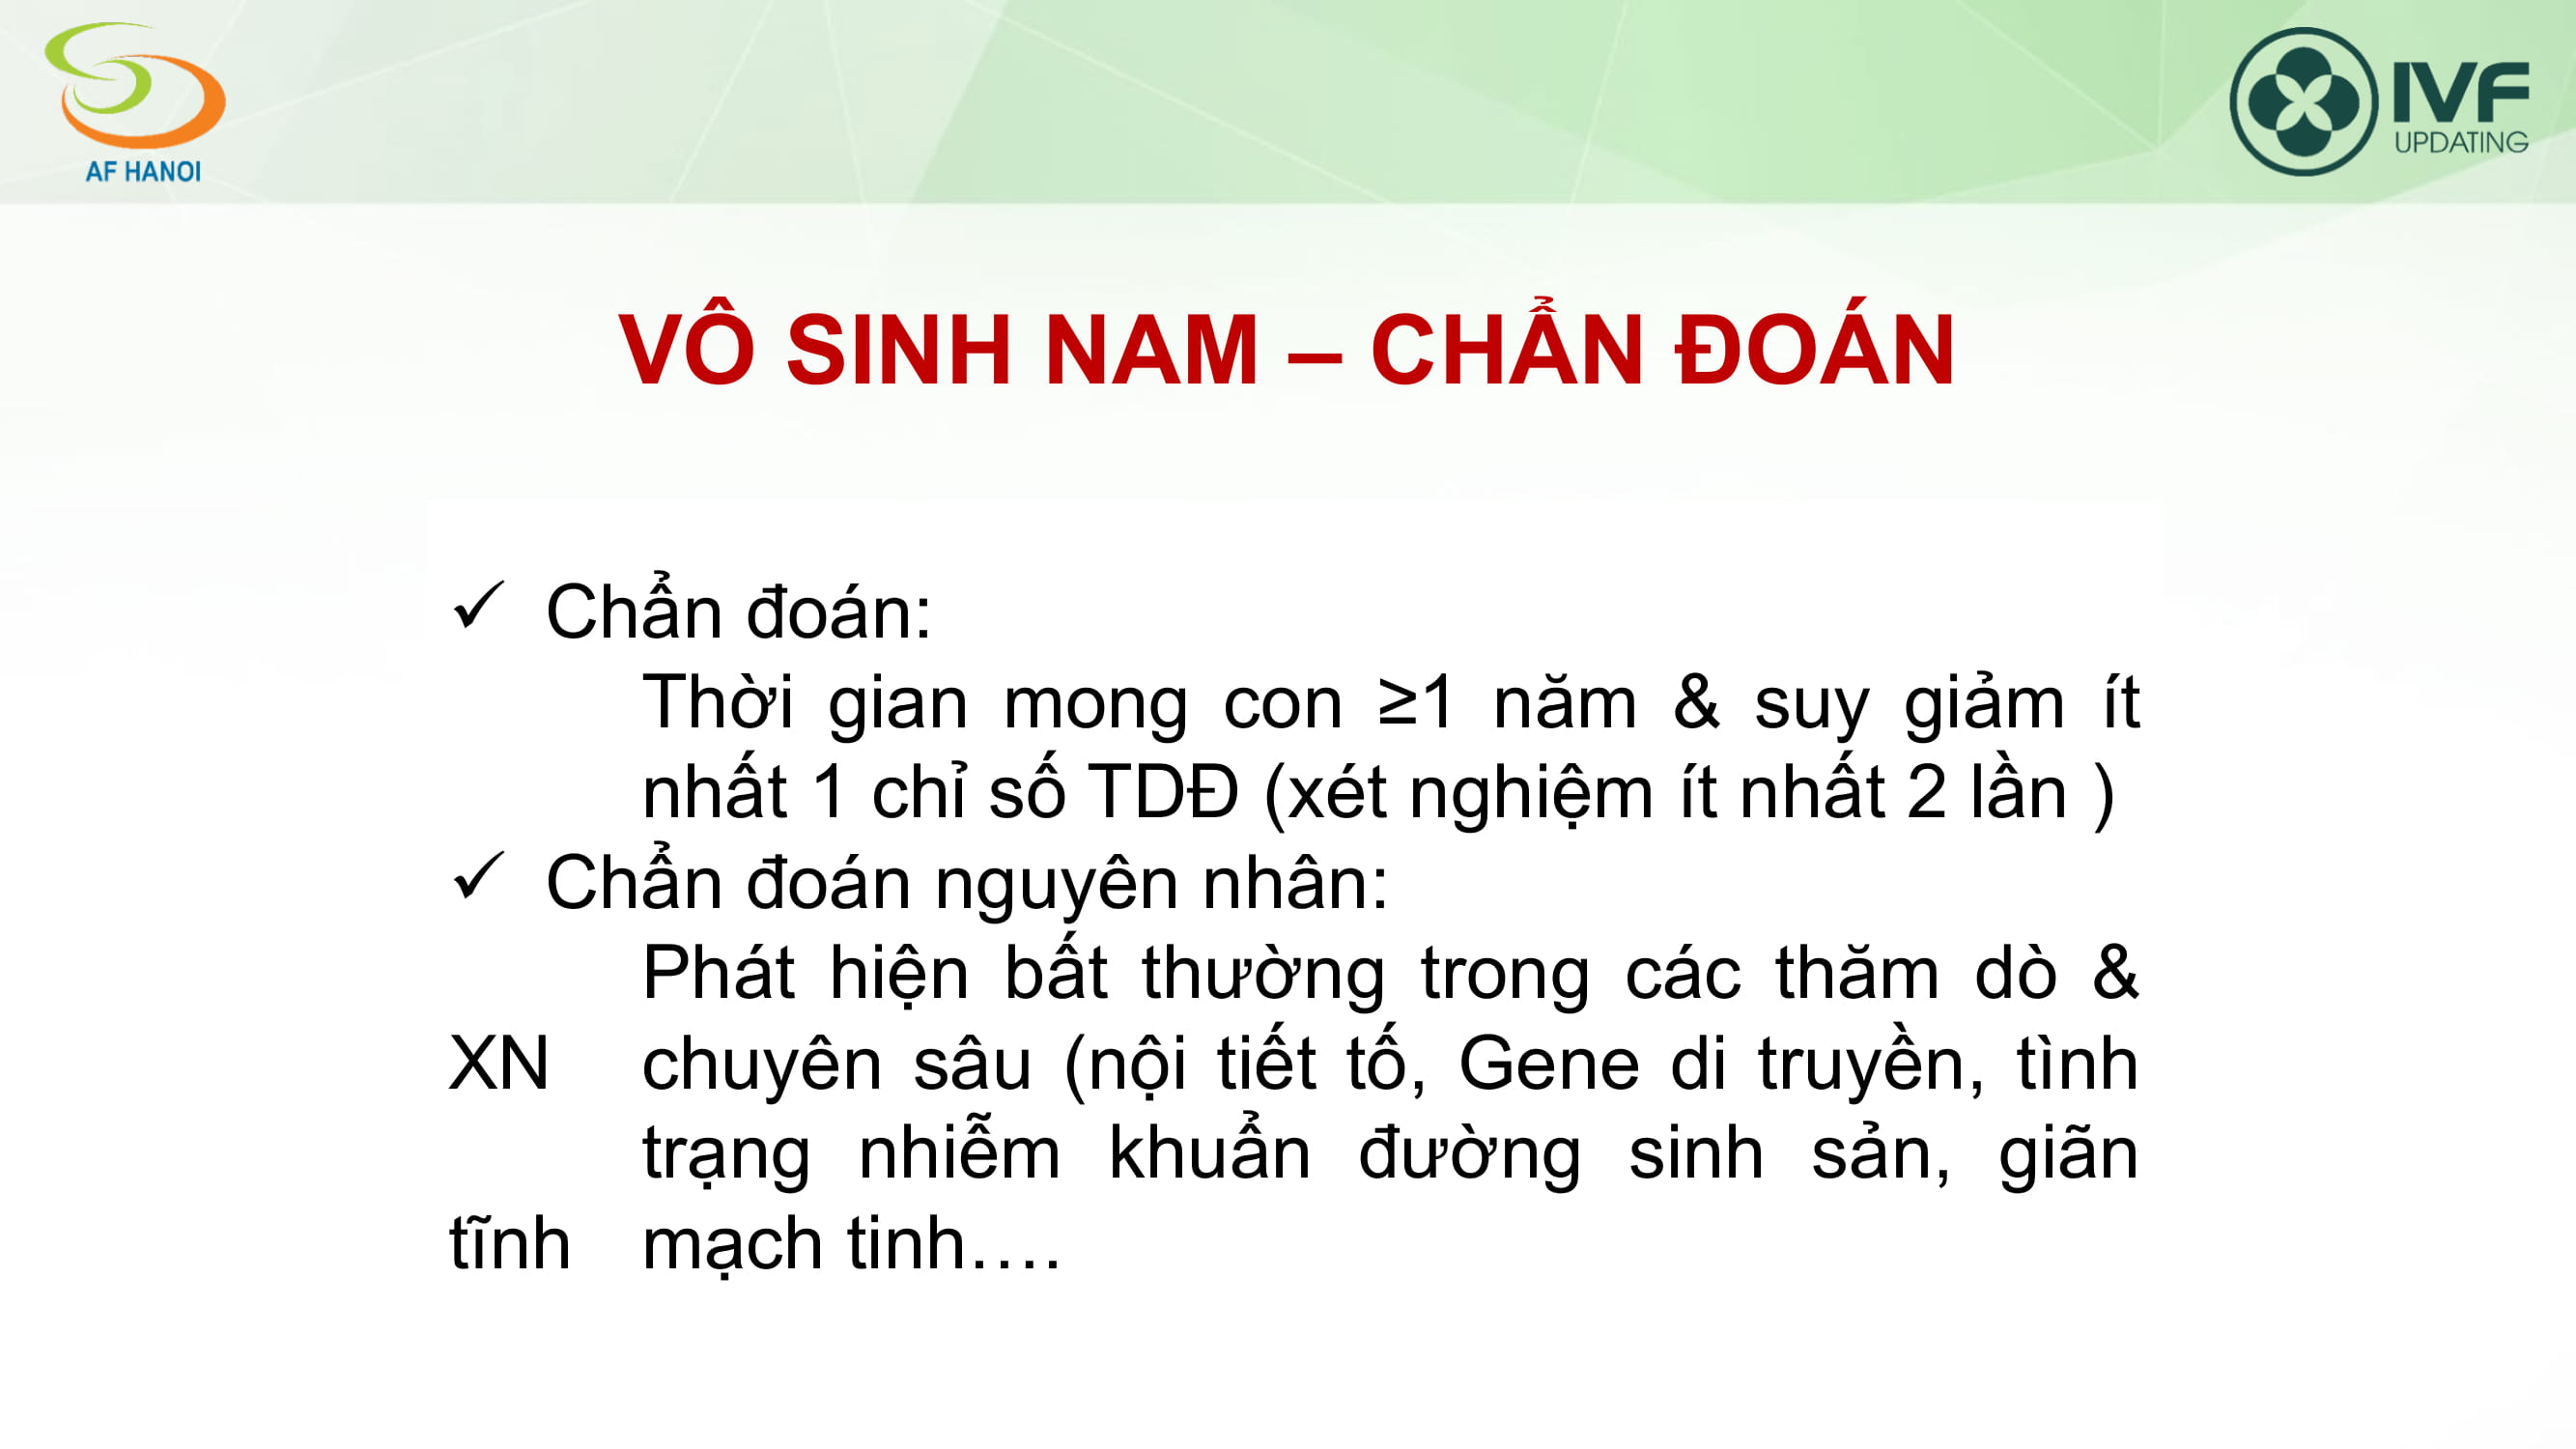 BS Nguyen Ba Hung - Chi dinh thuoc kich thich sinh tinh1-07